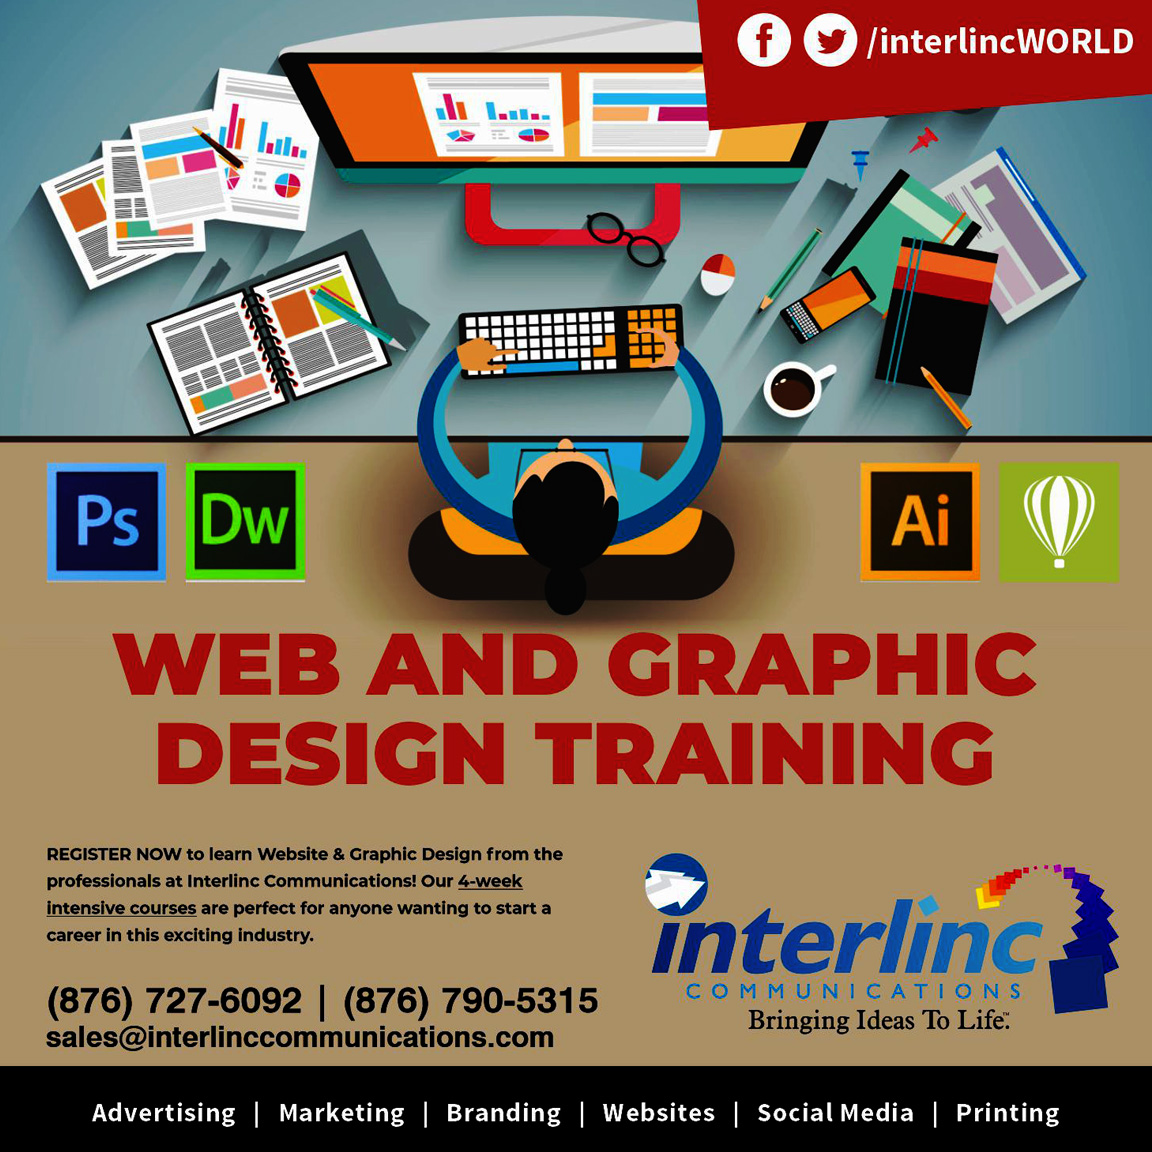 REGISTER NOW to learn Website & Graphic Design from the professionals at Interlinc Communications! Our 4-week intensive courses are perfect for anyone wanting to start a career in this exciting industry.